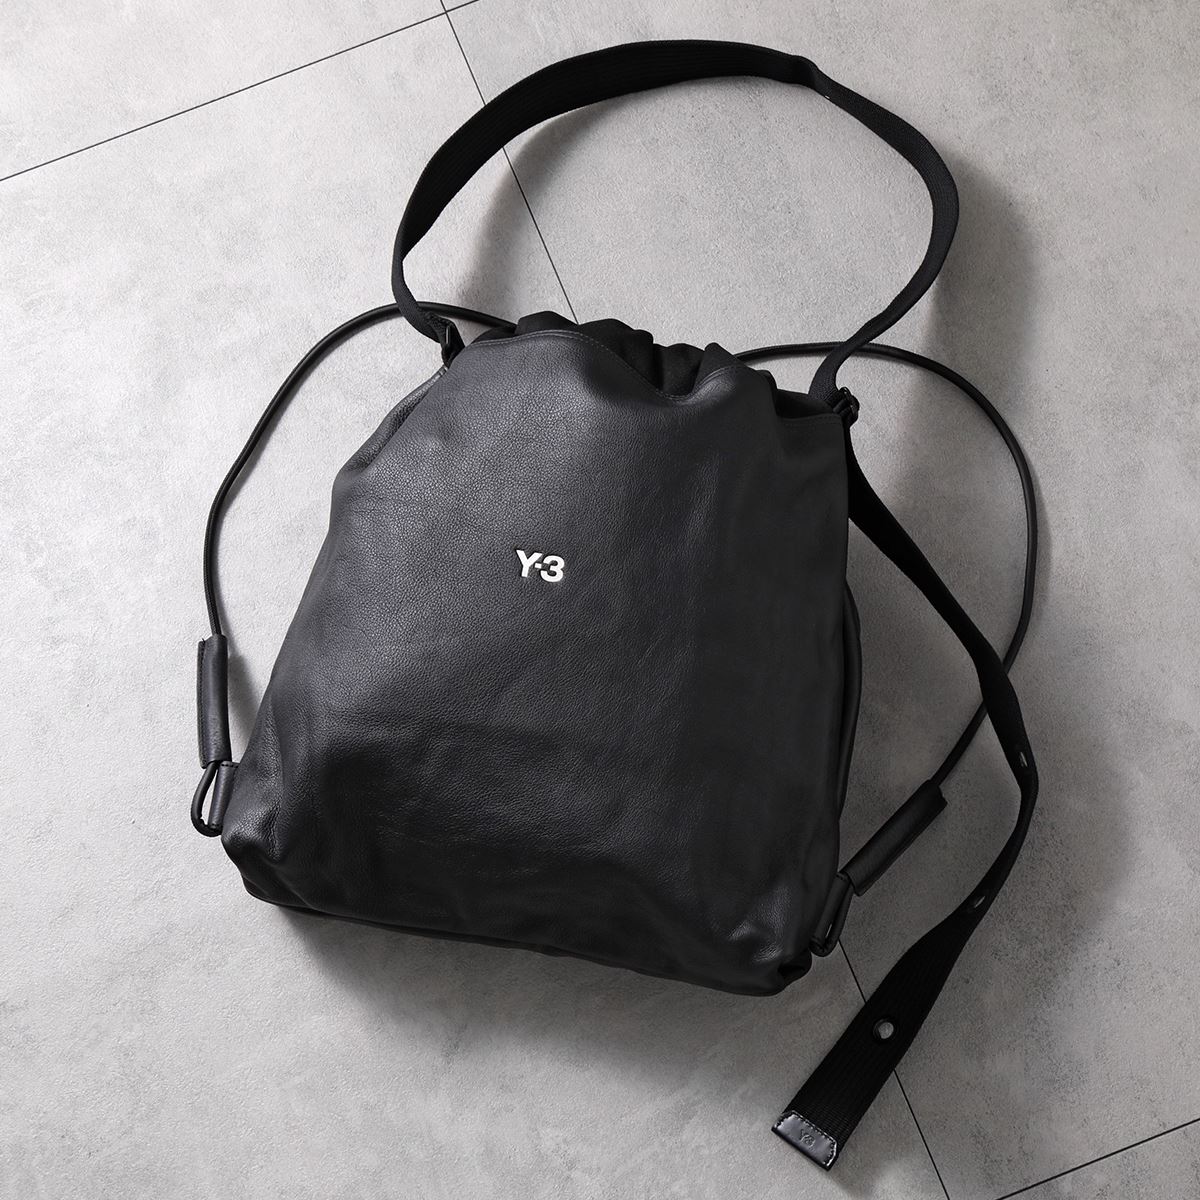 Y-3 ワイスリー トートバッグ LUX GYM BAG ジム バッグ IJ9876 IJ9877 ...